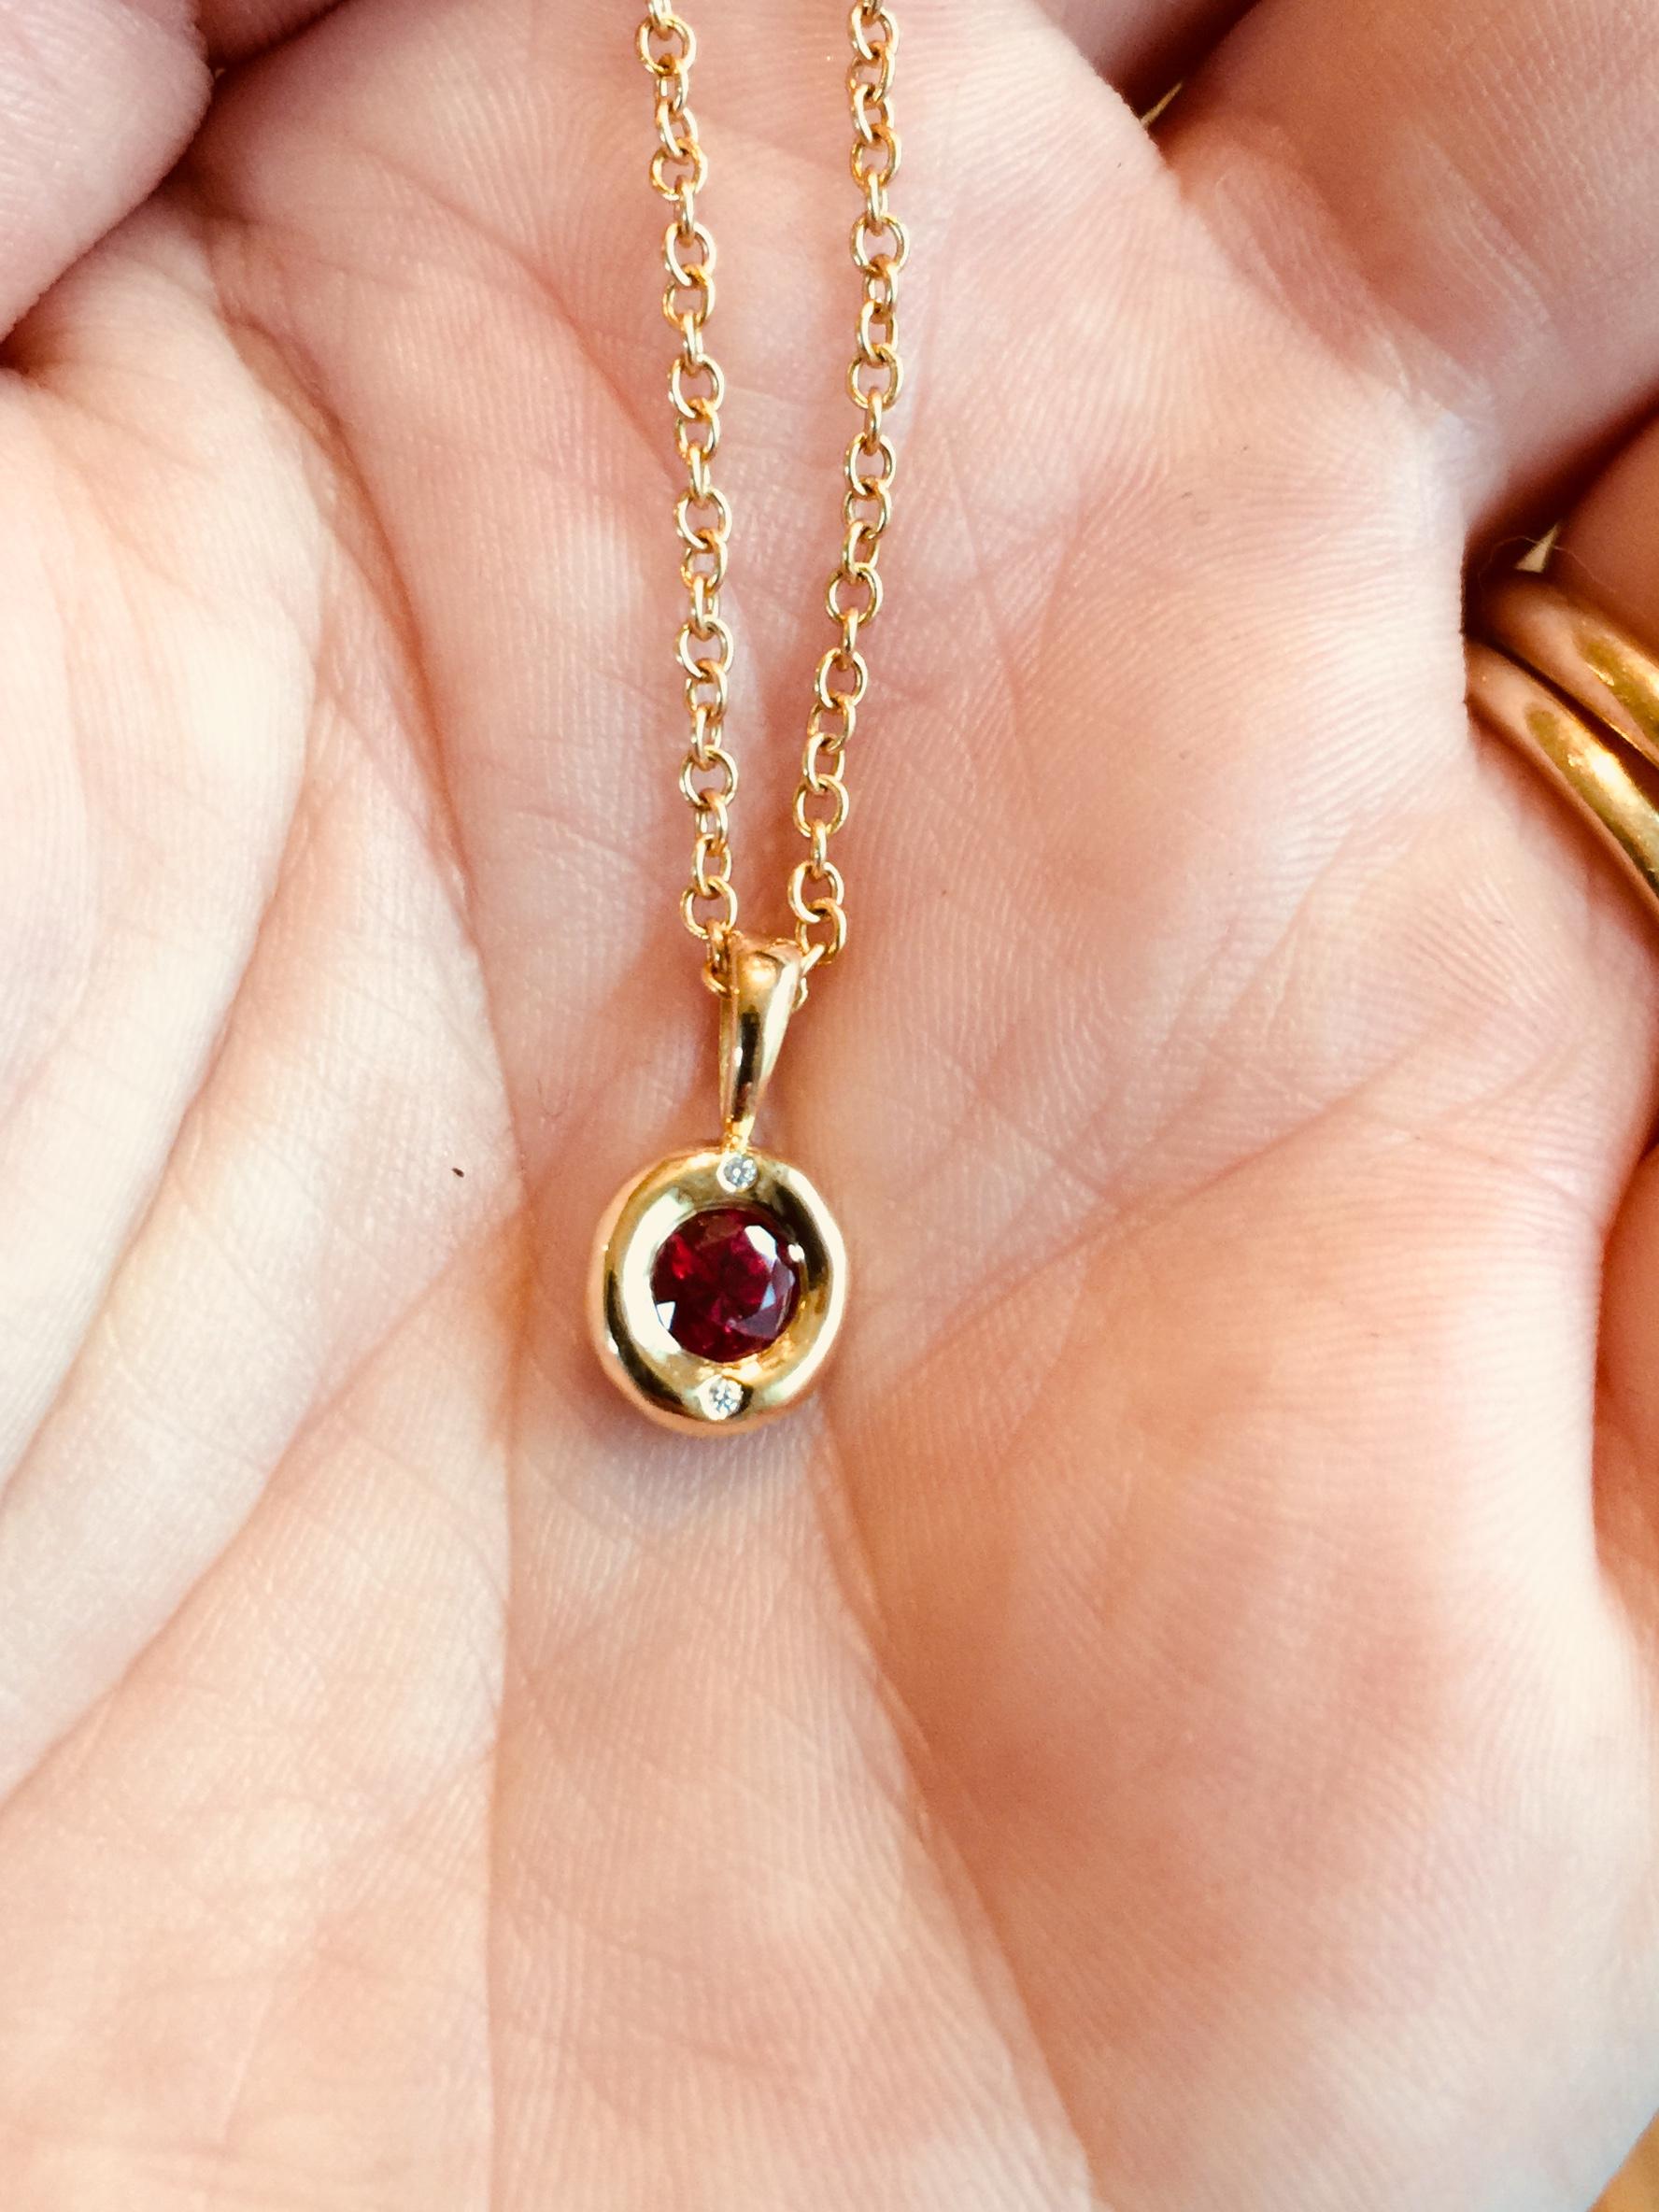 A ruby nested in 18 karat gold, worn independently or in multiple. Soft and sweet yet bright and daring. Hand carved wax/cast 18k gold bezel. $1,760. This price is for one single pendant. 

Other gems available, please contact for